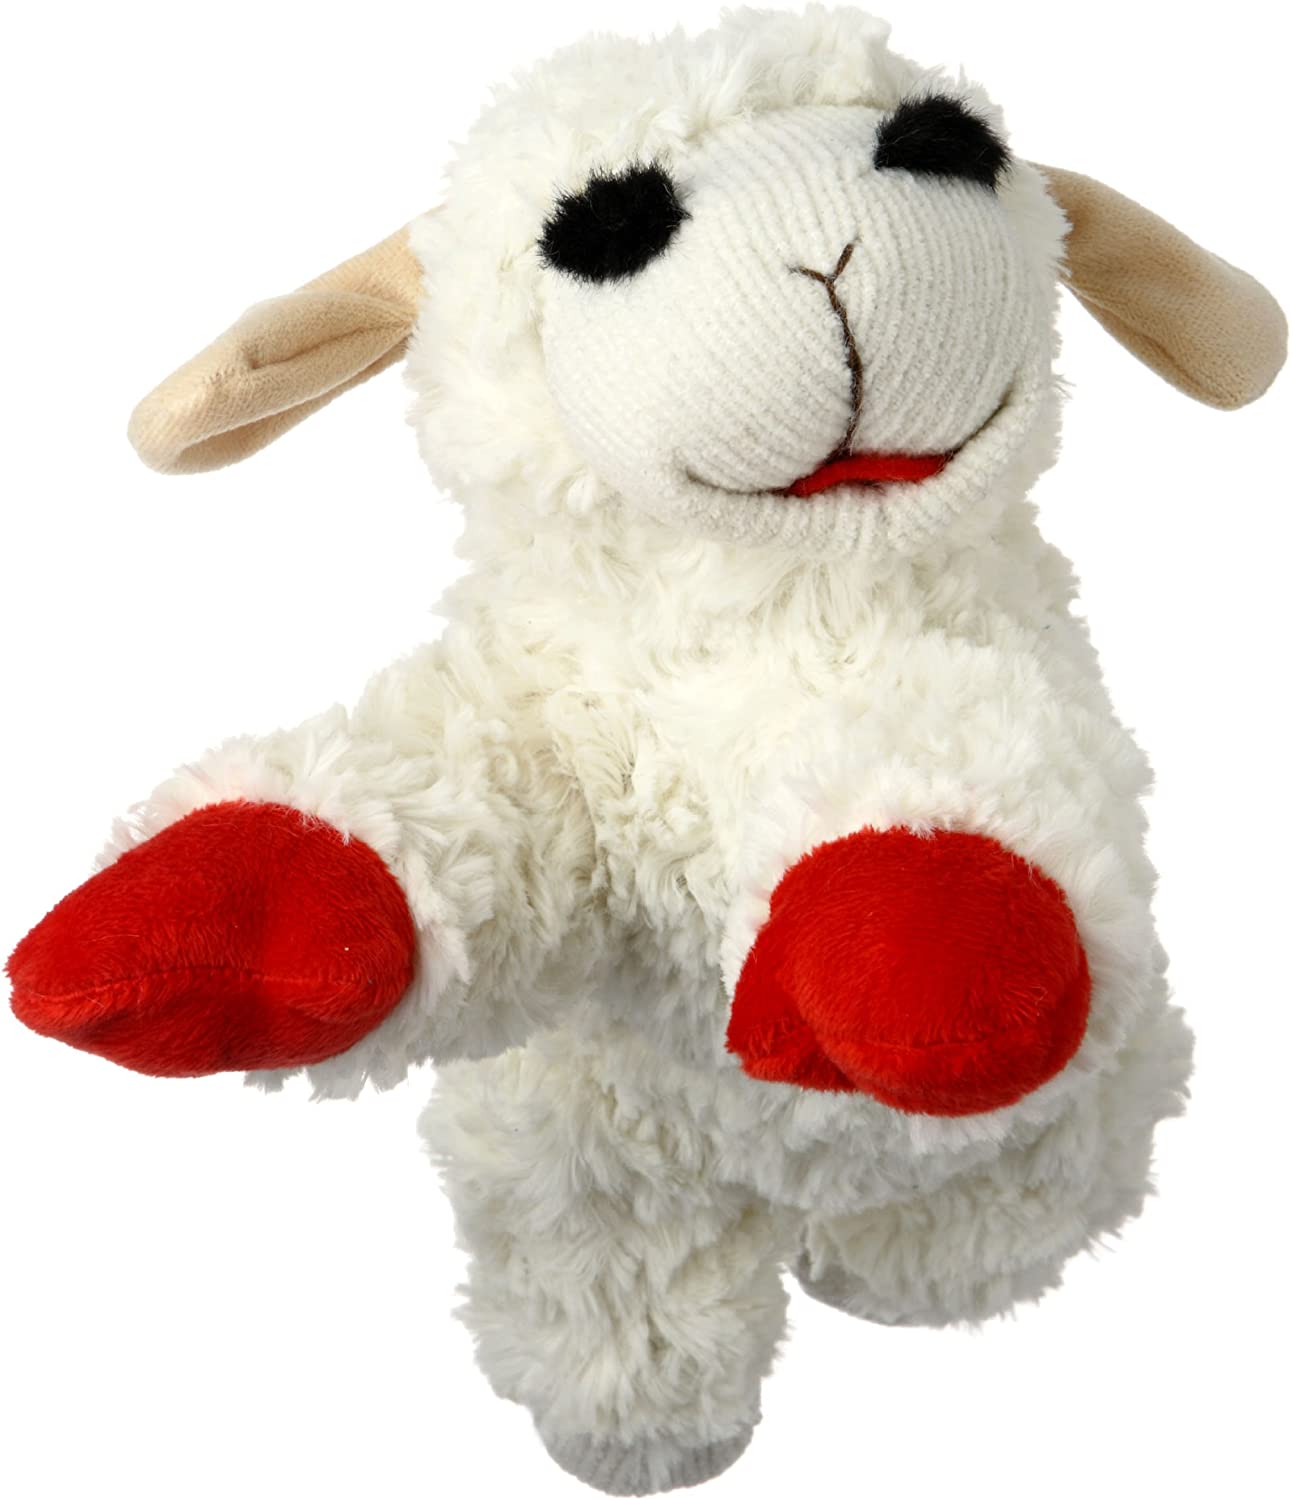 Multipet Lambchop Plush Dog Toy 10 with Squeaker